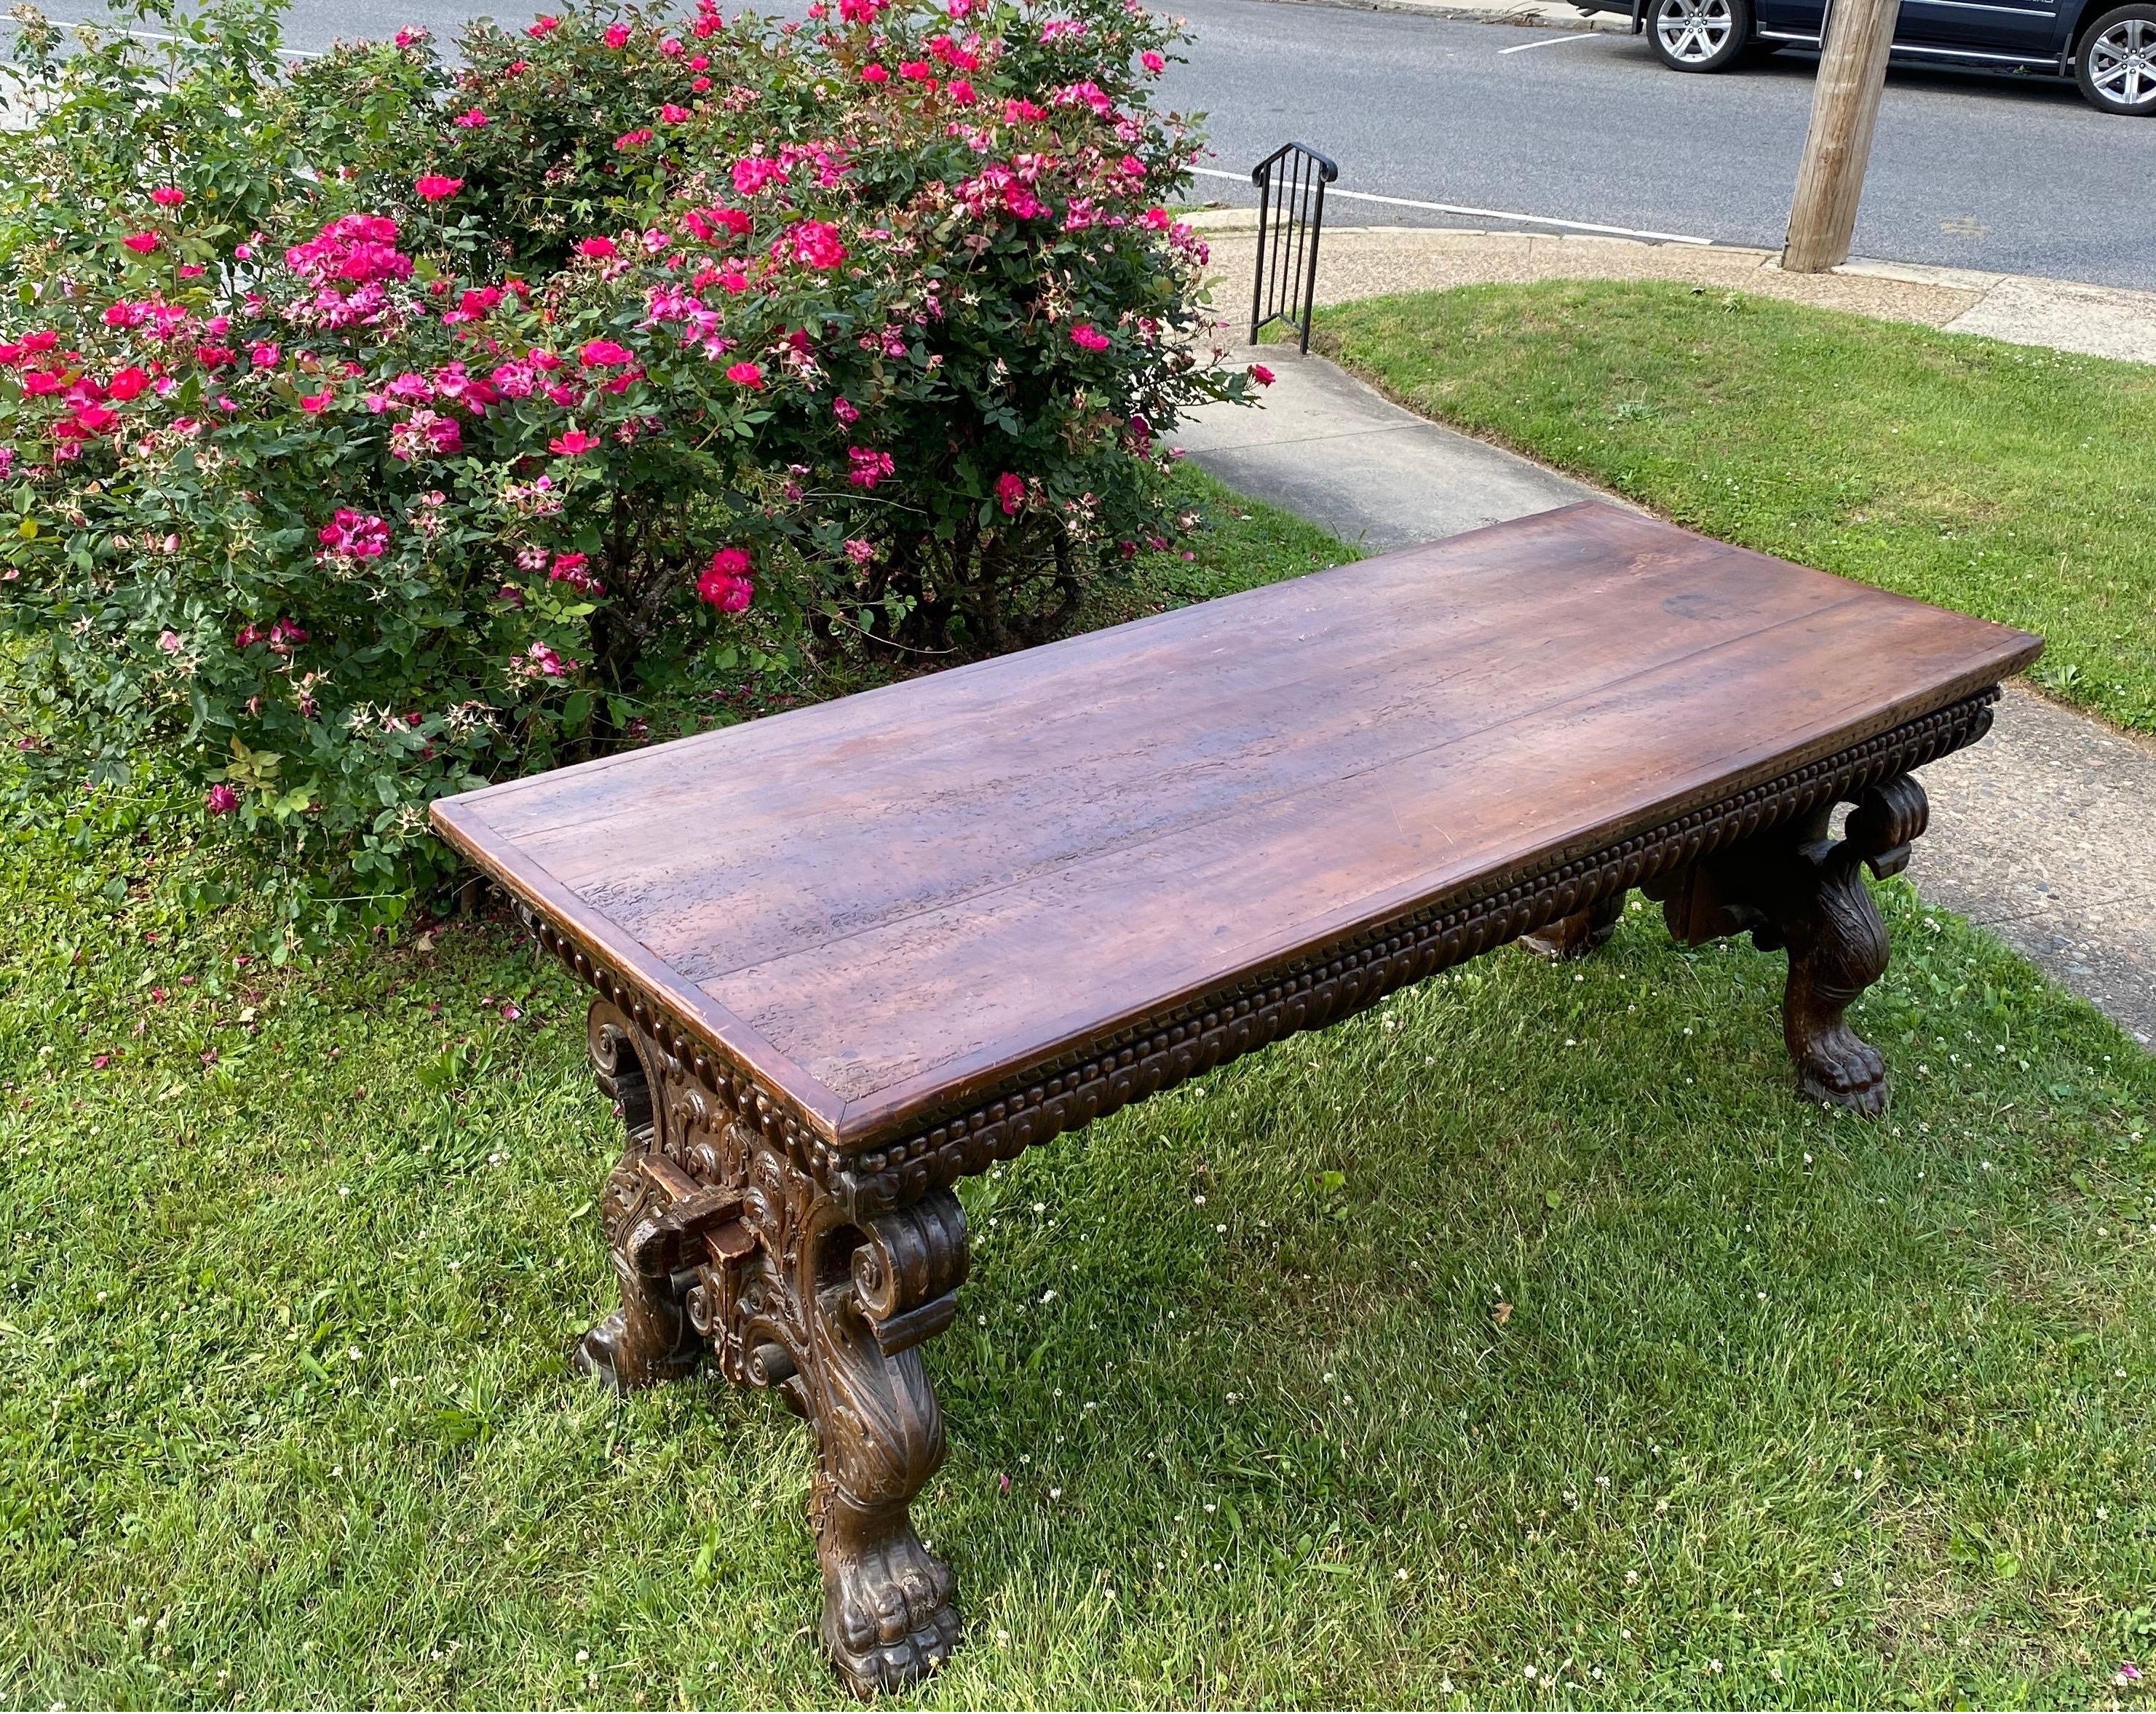 Incredible 17th-early 18th century Italian Baroque walnut trestle table from Tuscany. Hand carved throughout, this table features massive paw feet, scrolled knees and carved apron. Each base is made of 2 parts that come together to reveal a coat of